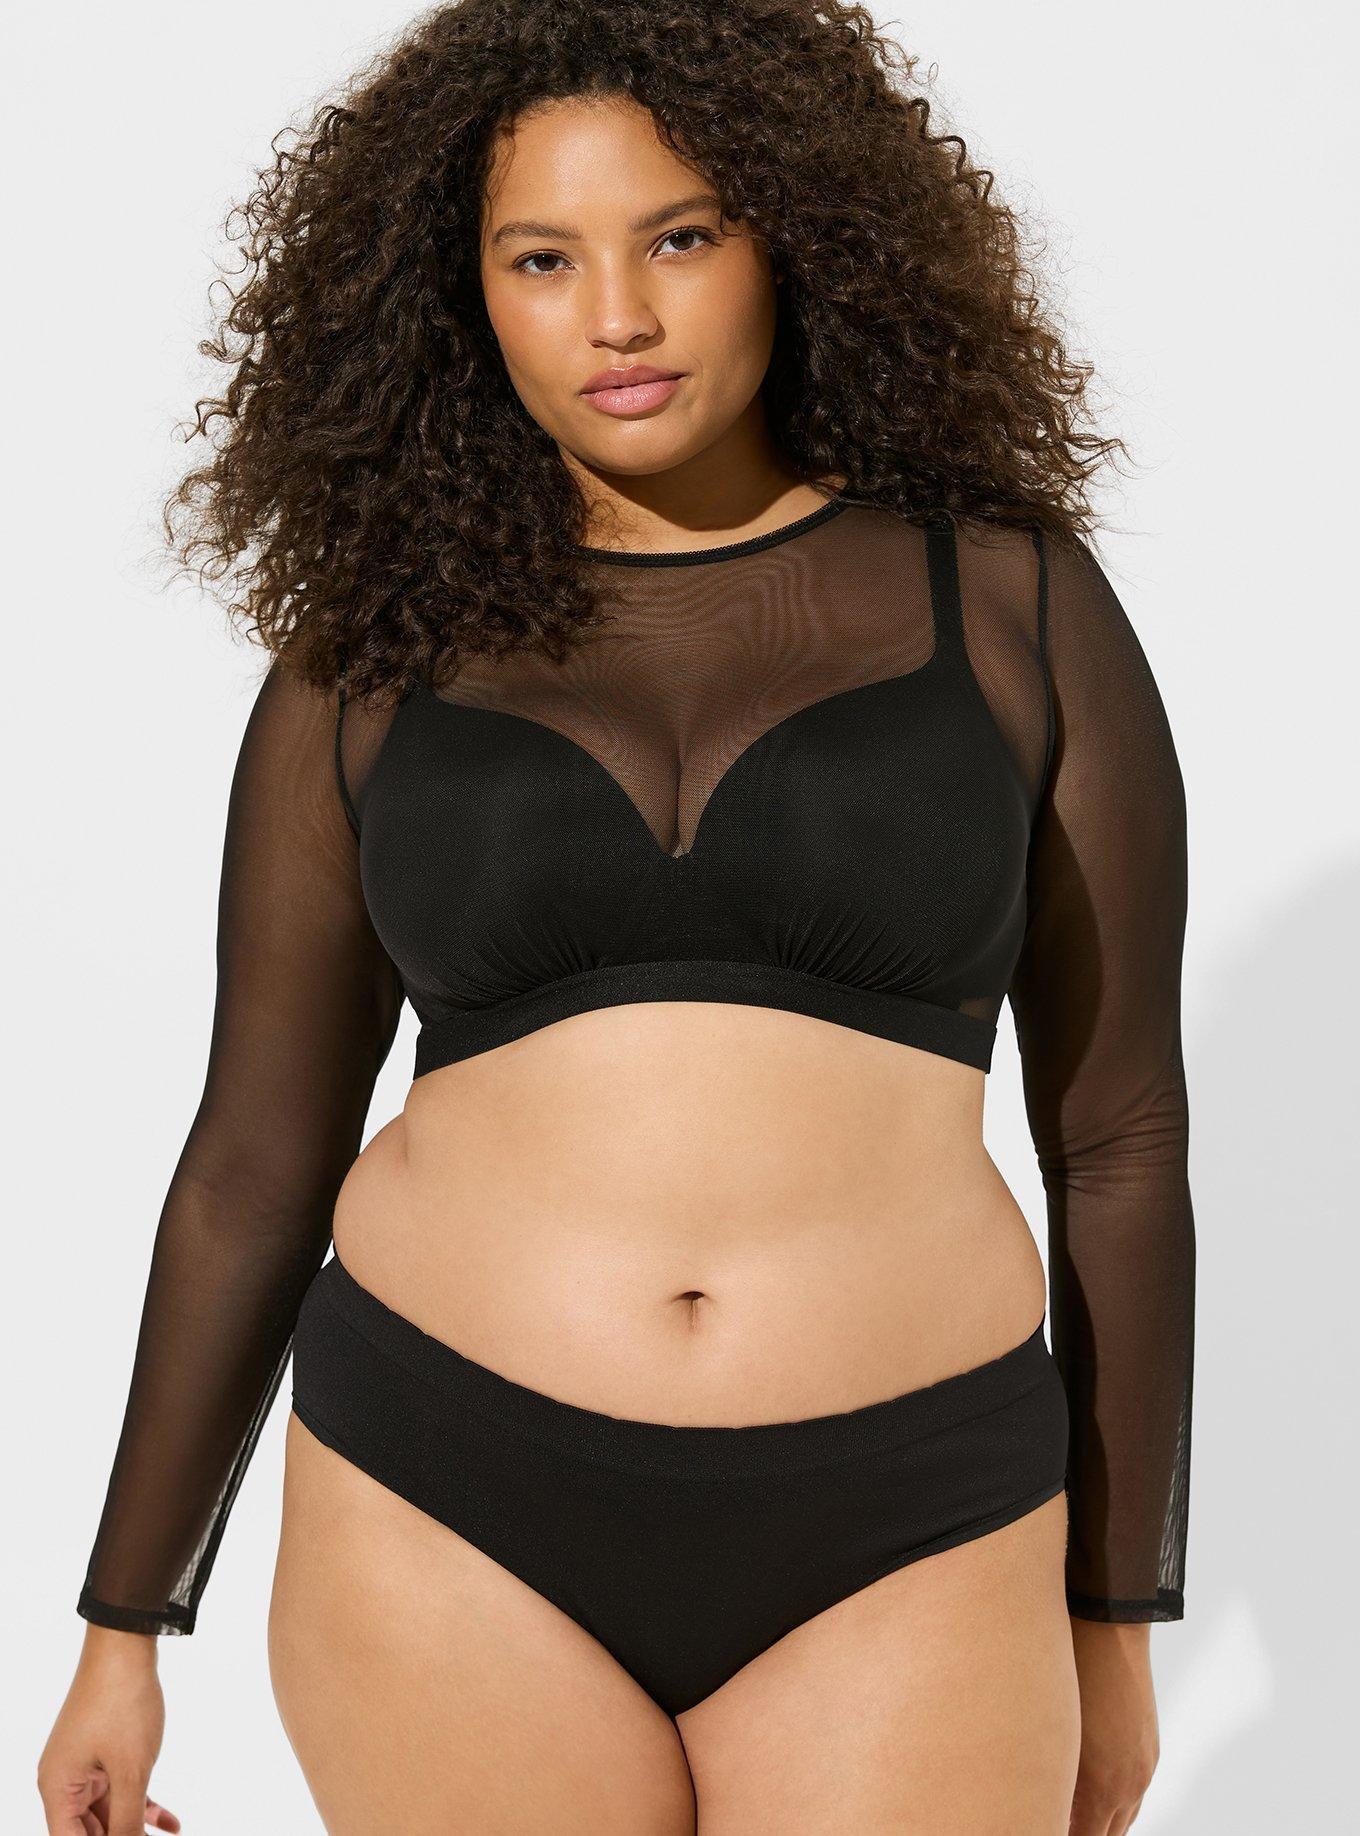 Torrid - Sexy, cute, supportive, and what you need at 40% OFF